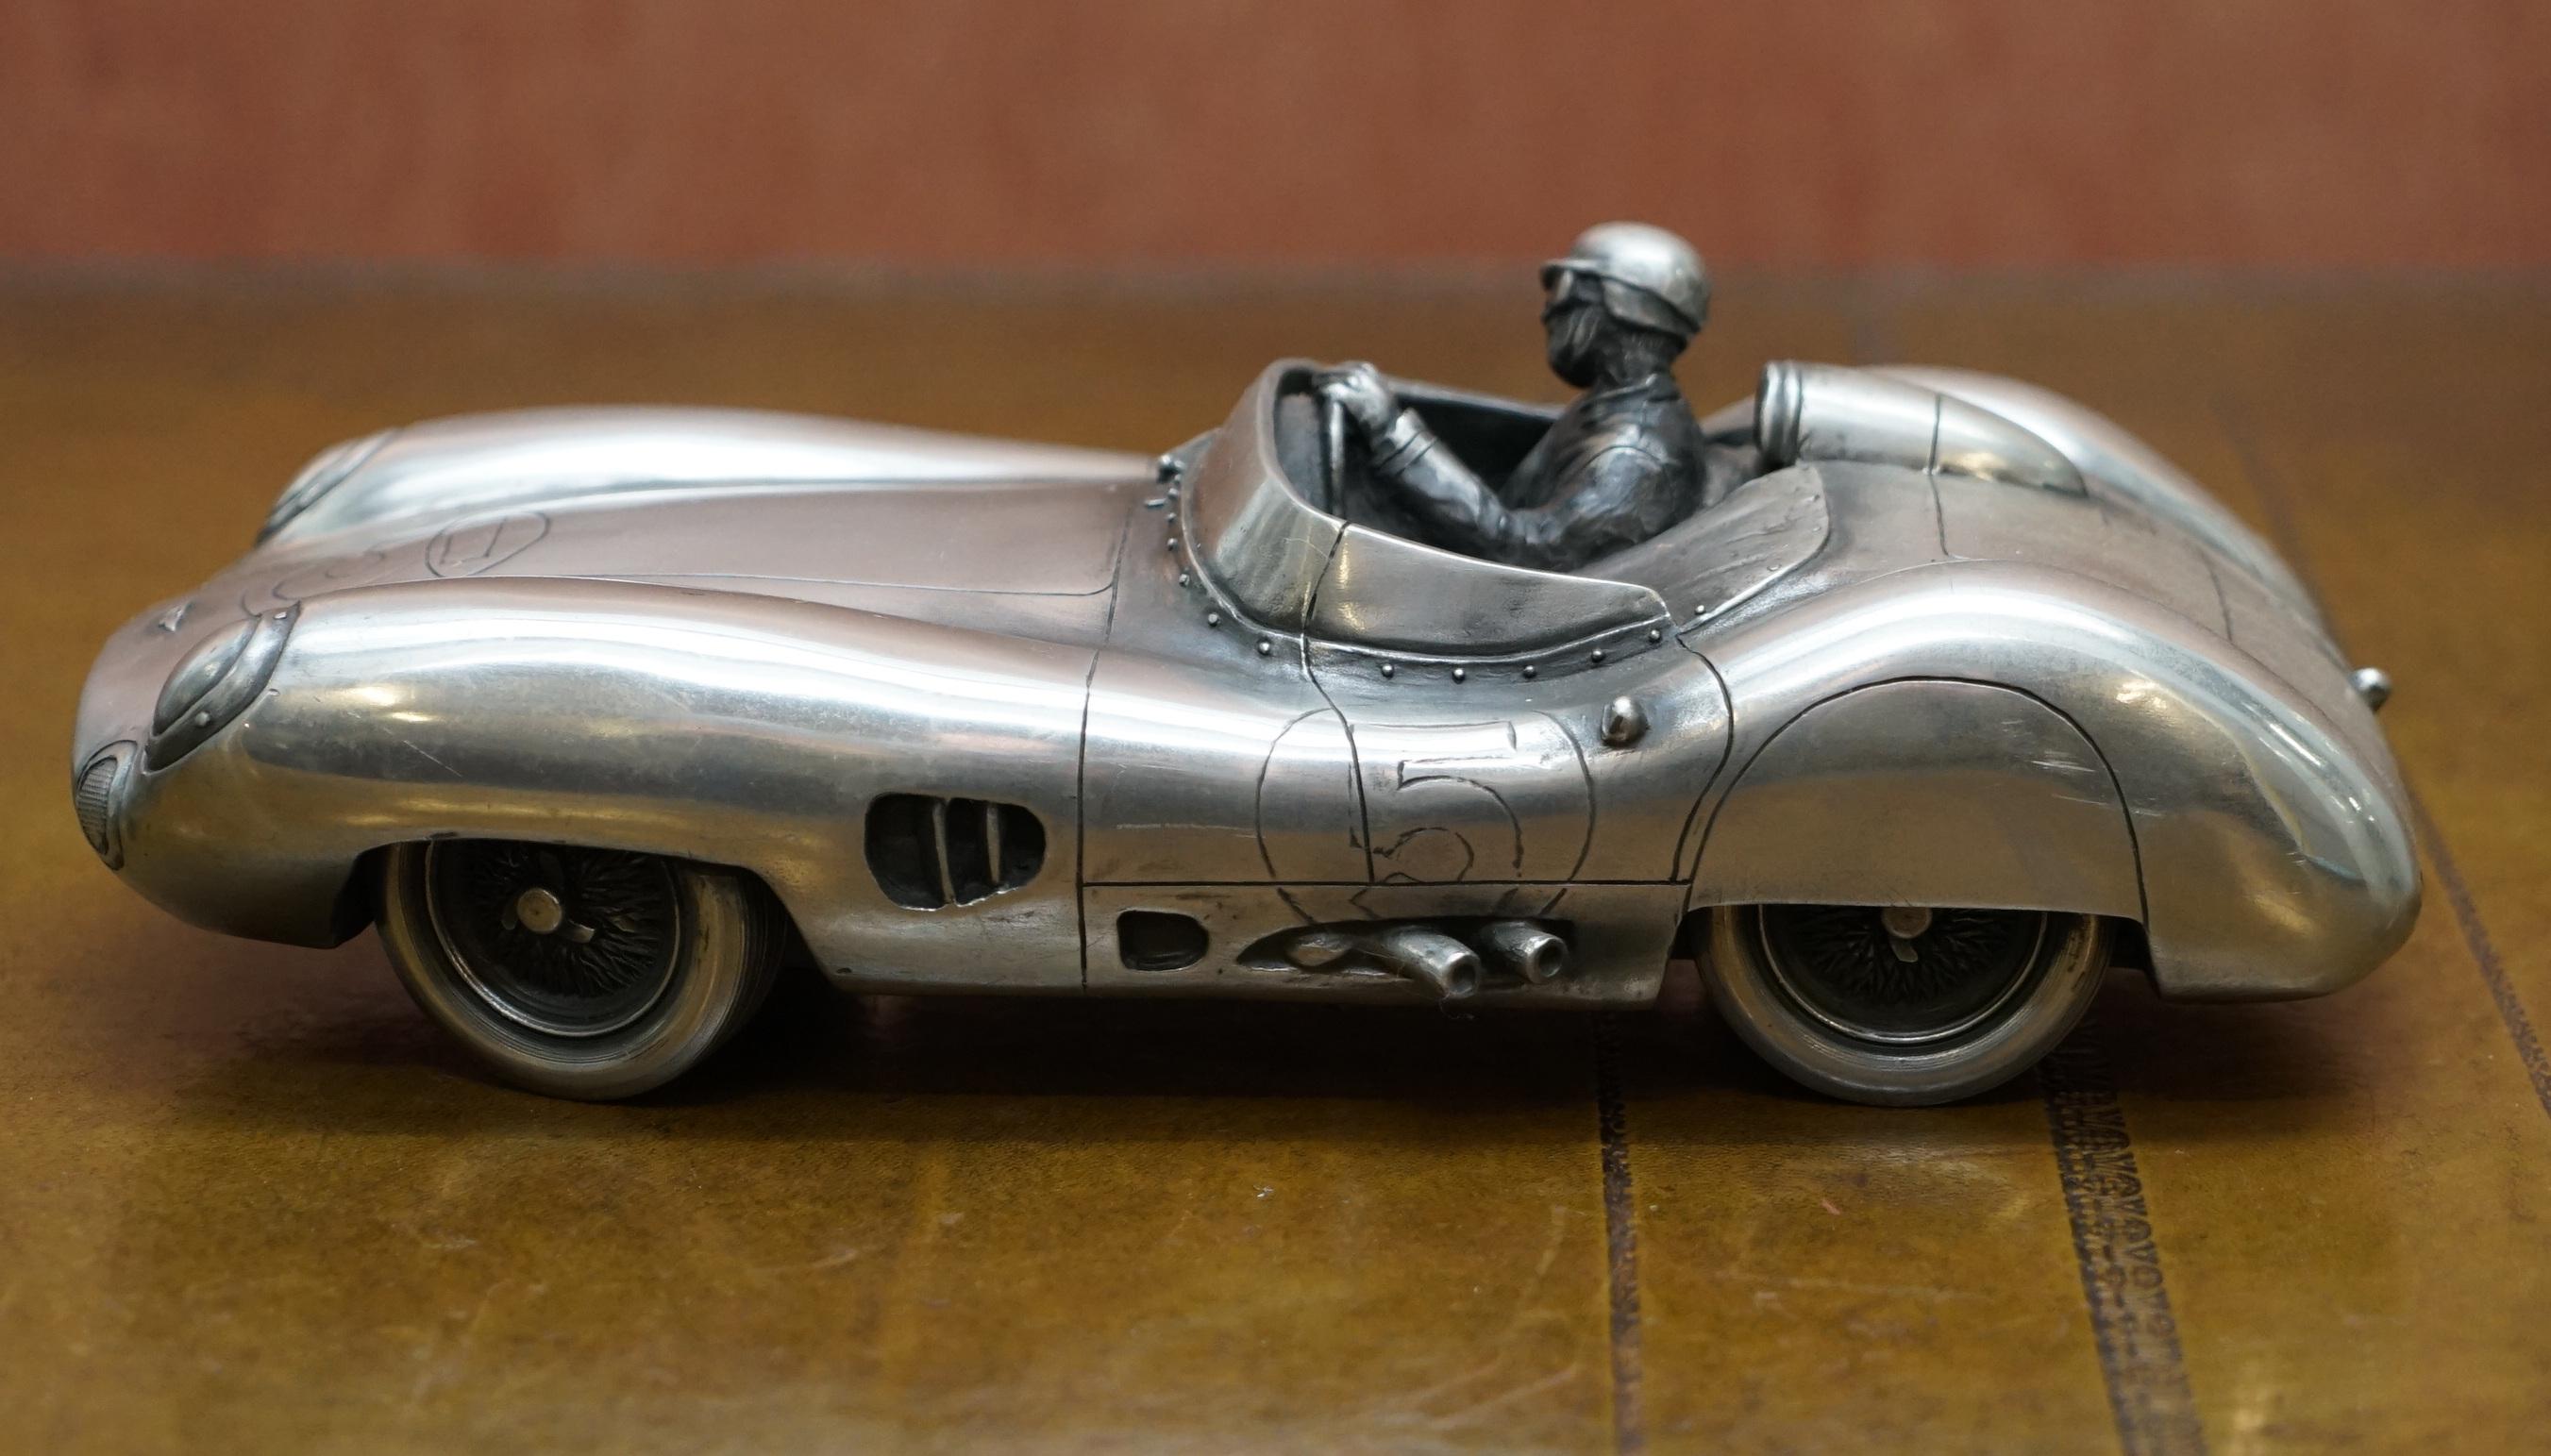 Hand-Crafted Compulsion Gallery Pewter Large Aston Martin DBR1 Car Model 1959 Le Mans Racing